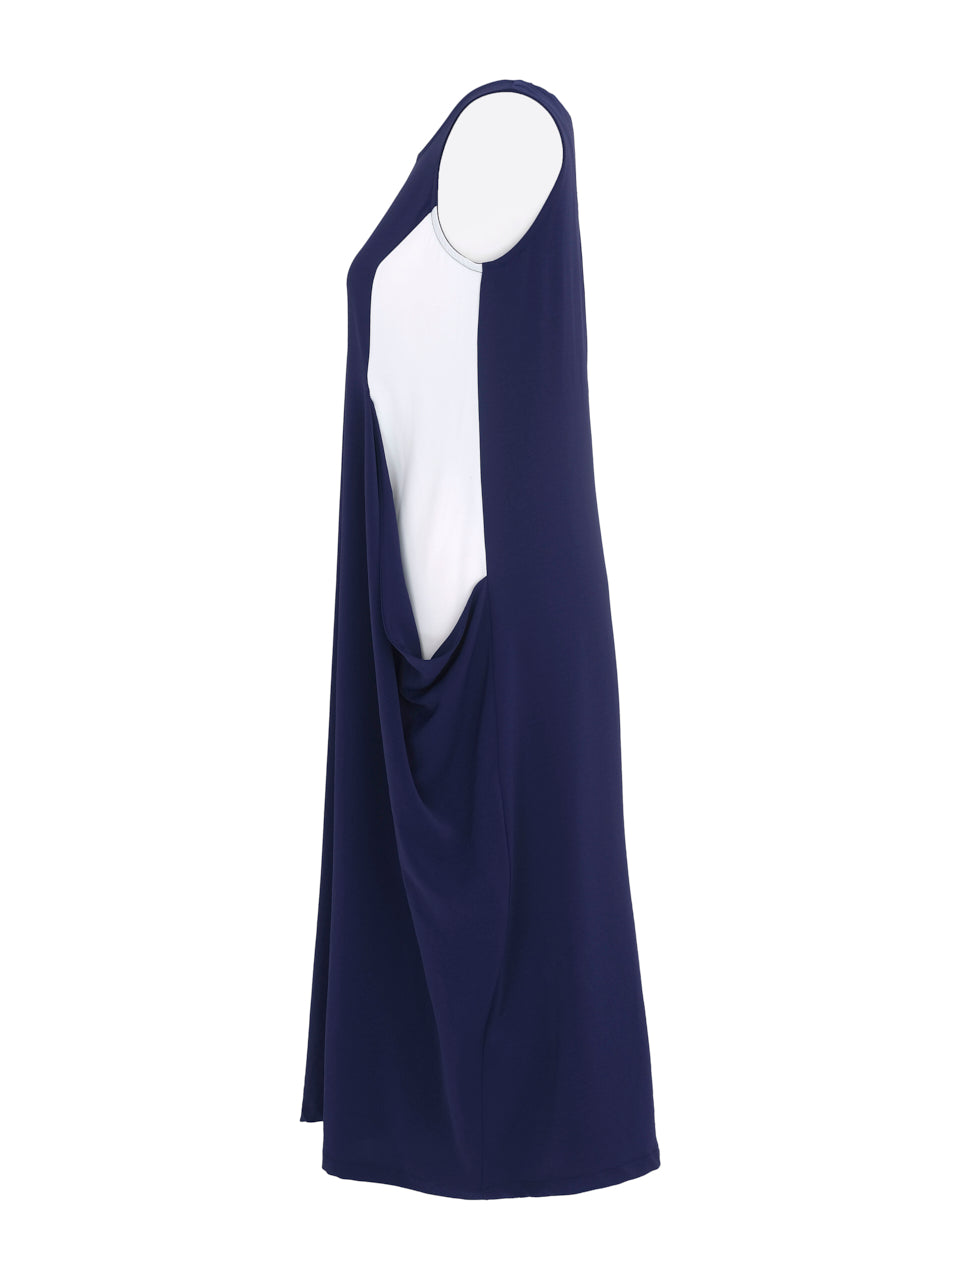 EverSassy balloon style dress in navy with white panels, midi length, sleeveless and pockets (side)